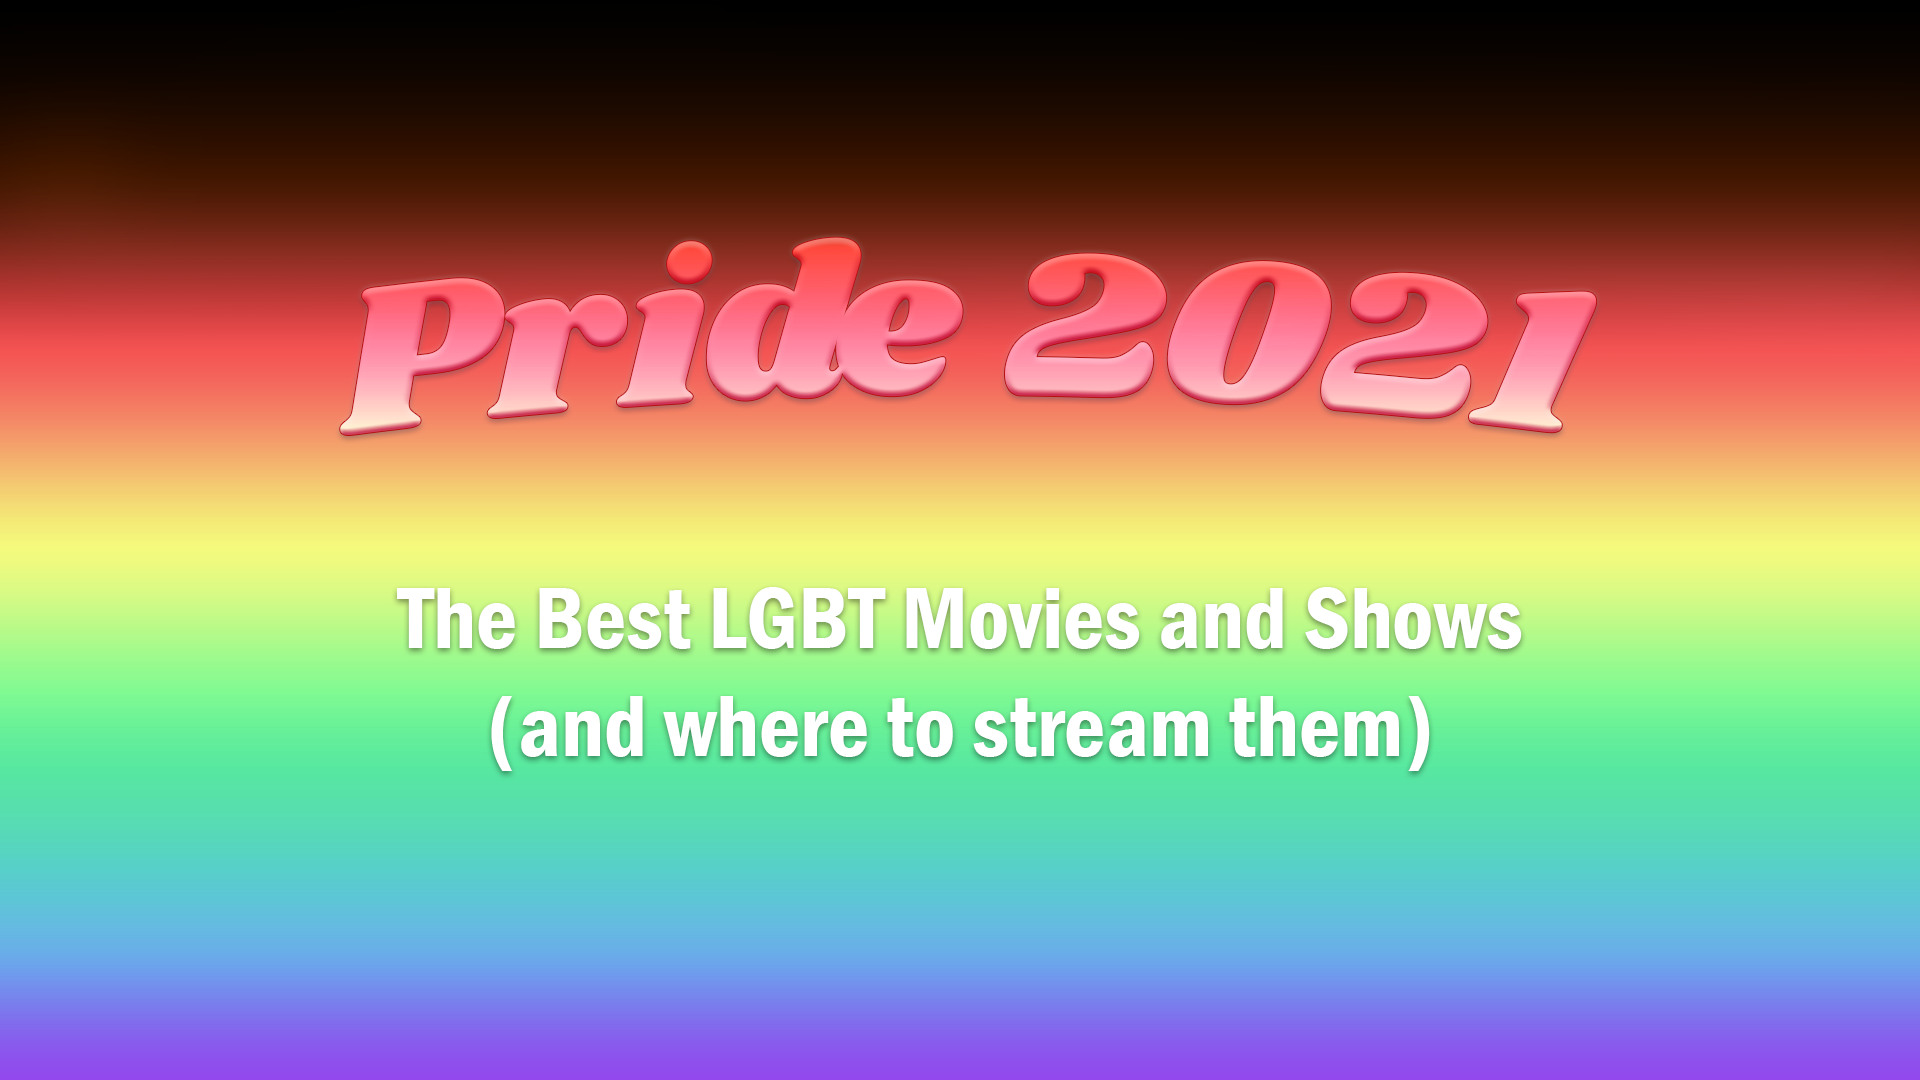 The Best LGBT Films and Shows to Watch Online